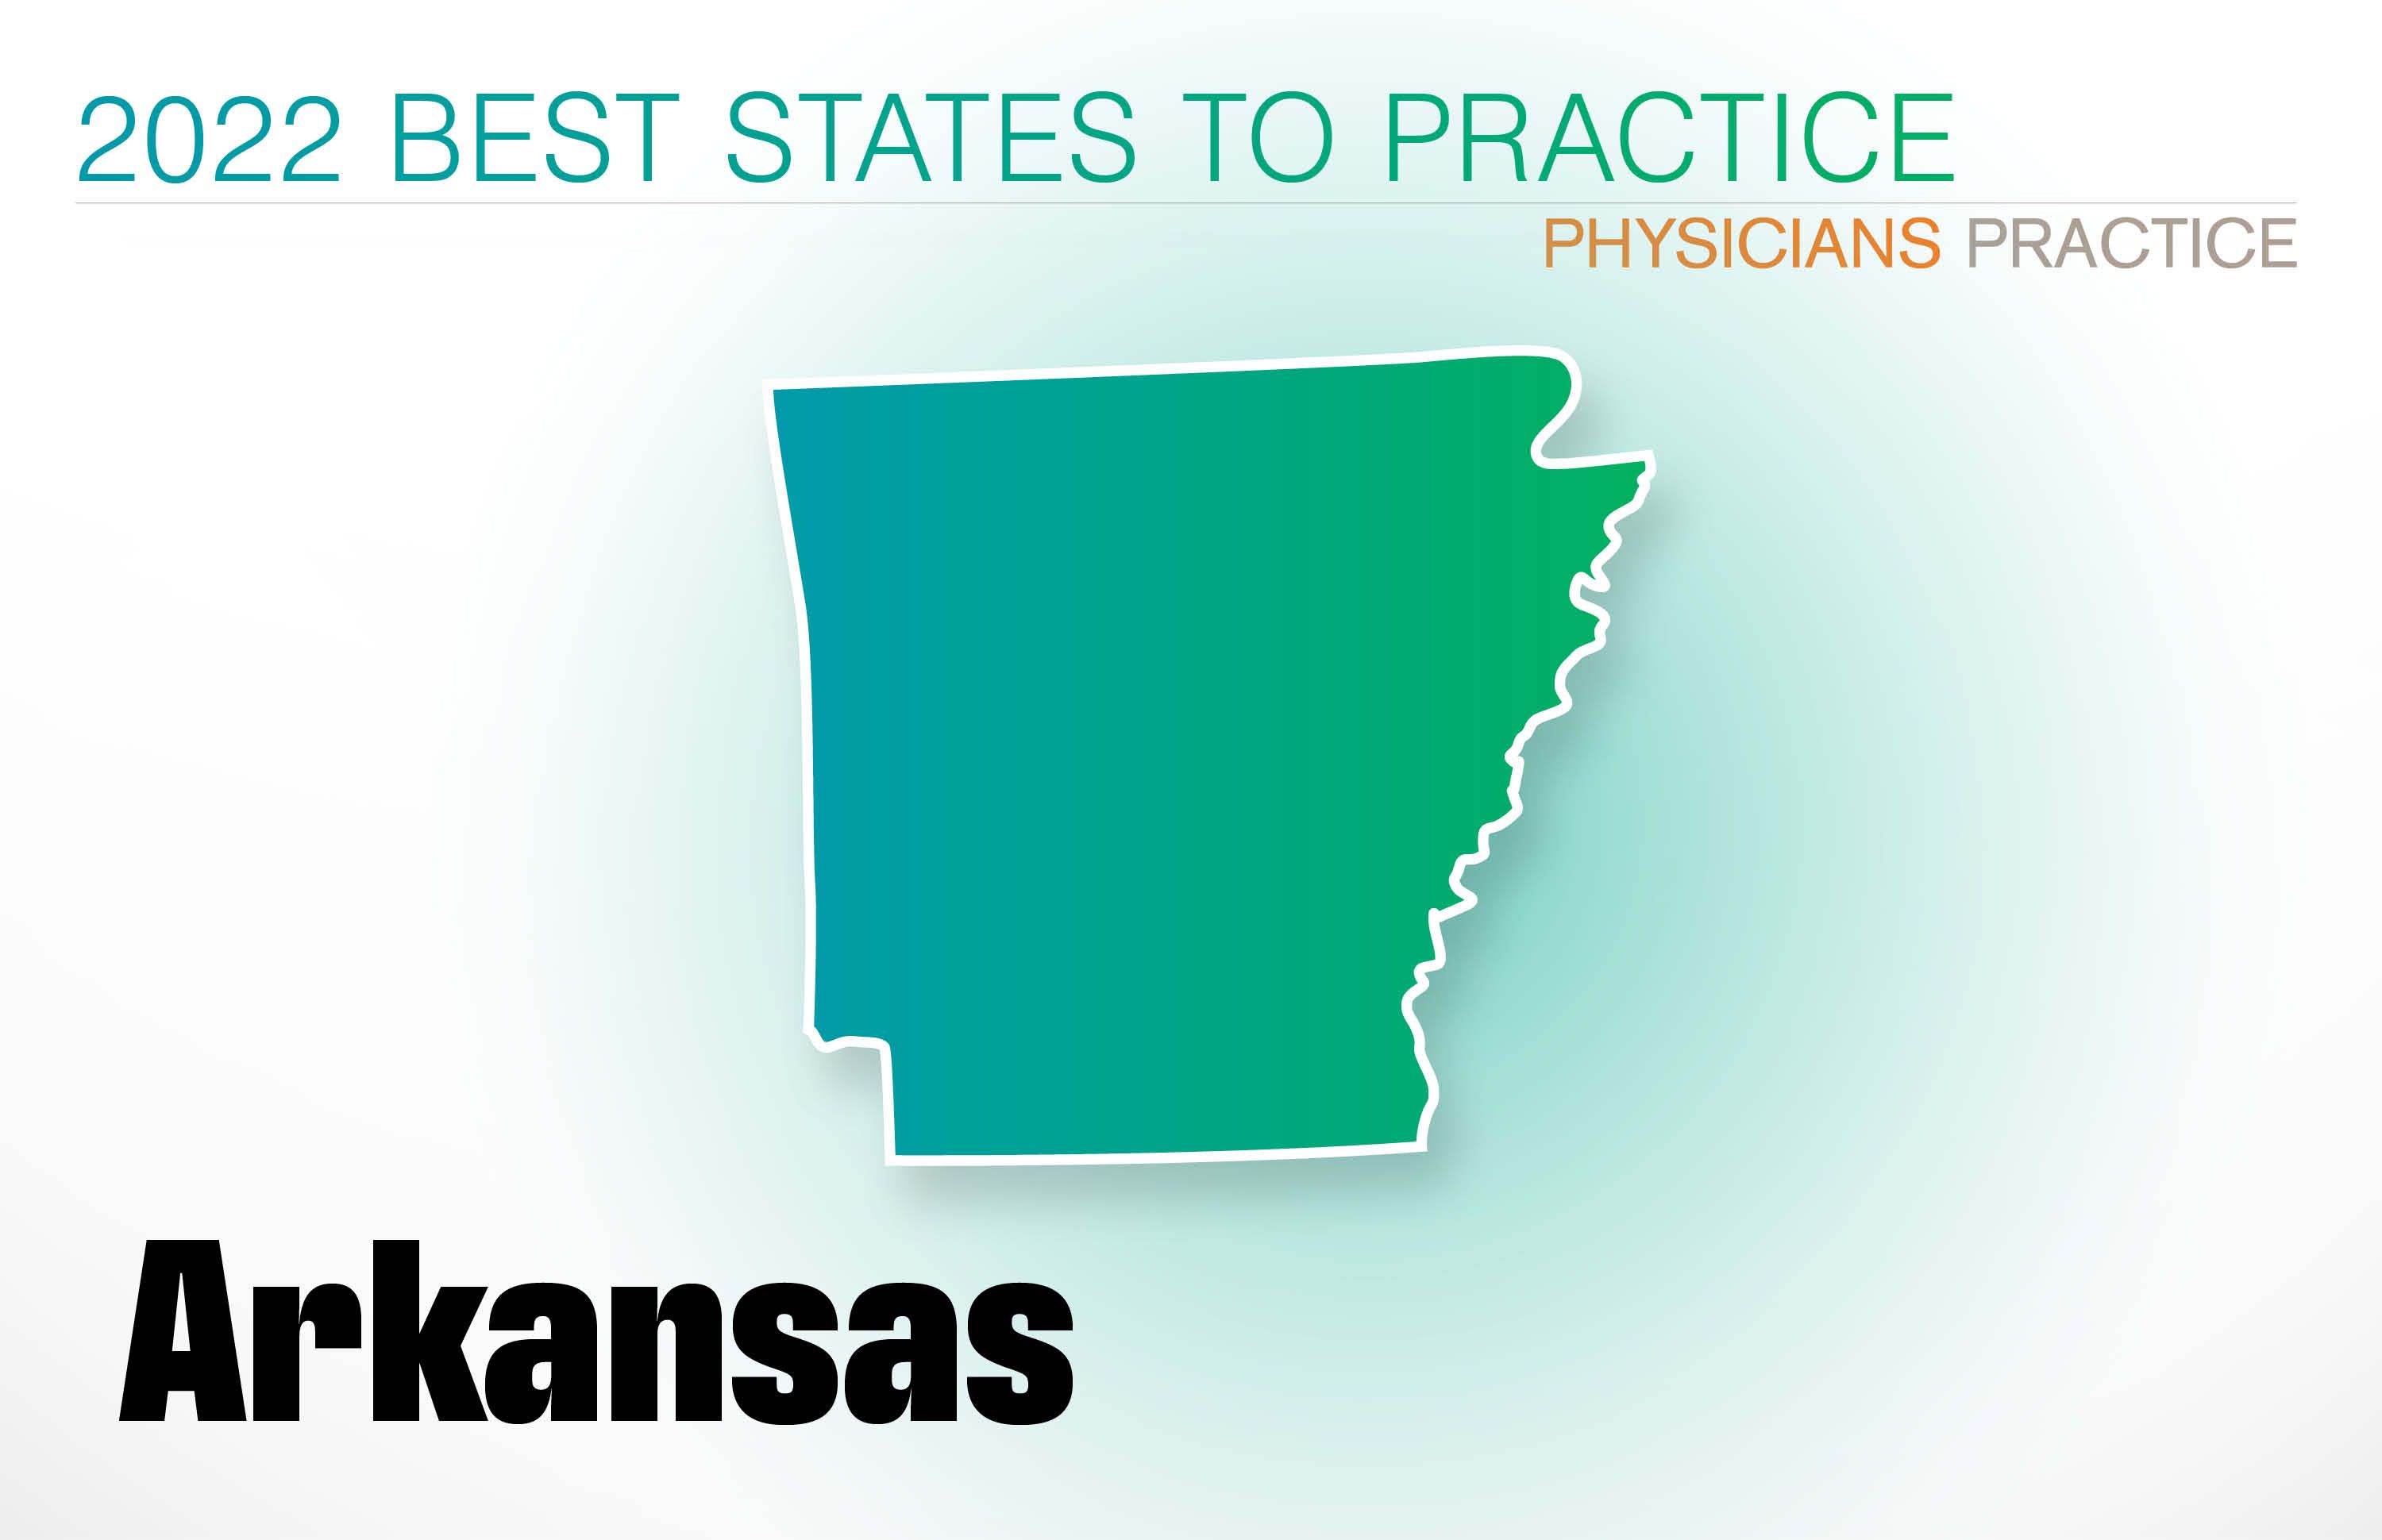 #13 Arkansas Rankings: Cost of living: 9 Physician density: 5 Amount of state business taxes collected: 44 Average malpractice insurance rates: 5 Quality of life: 43 GPCI: 4